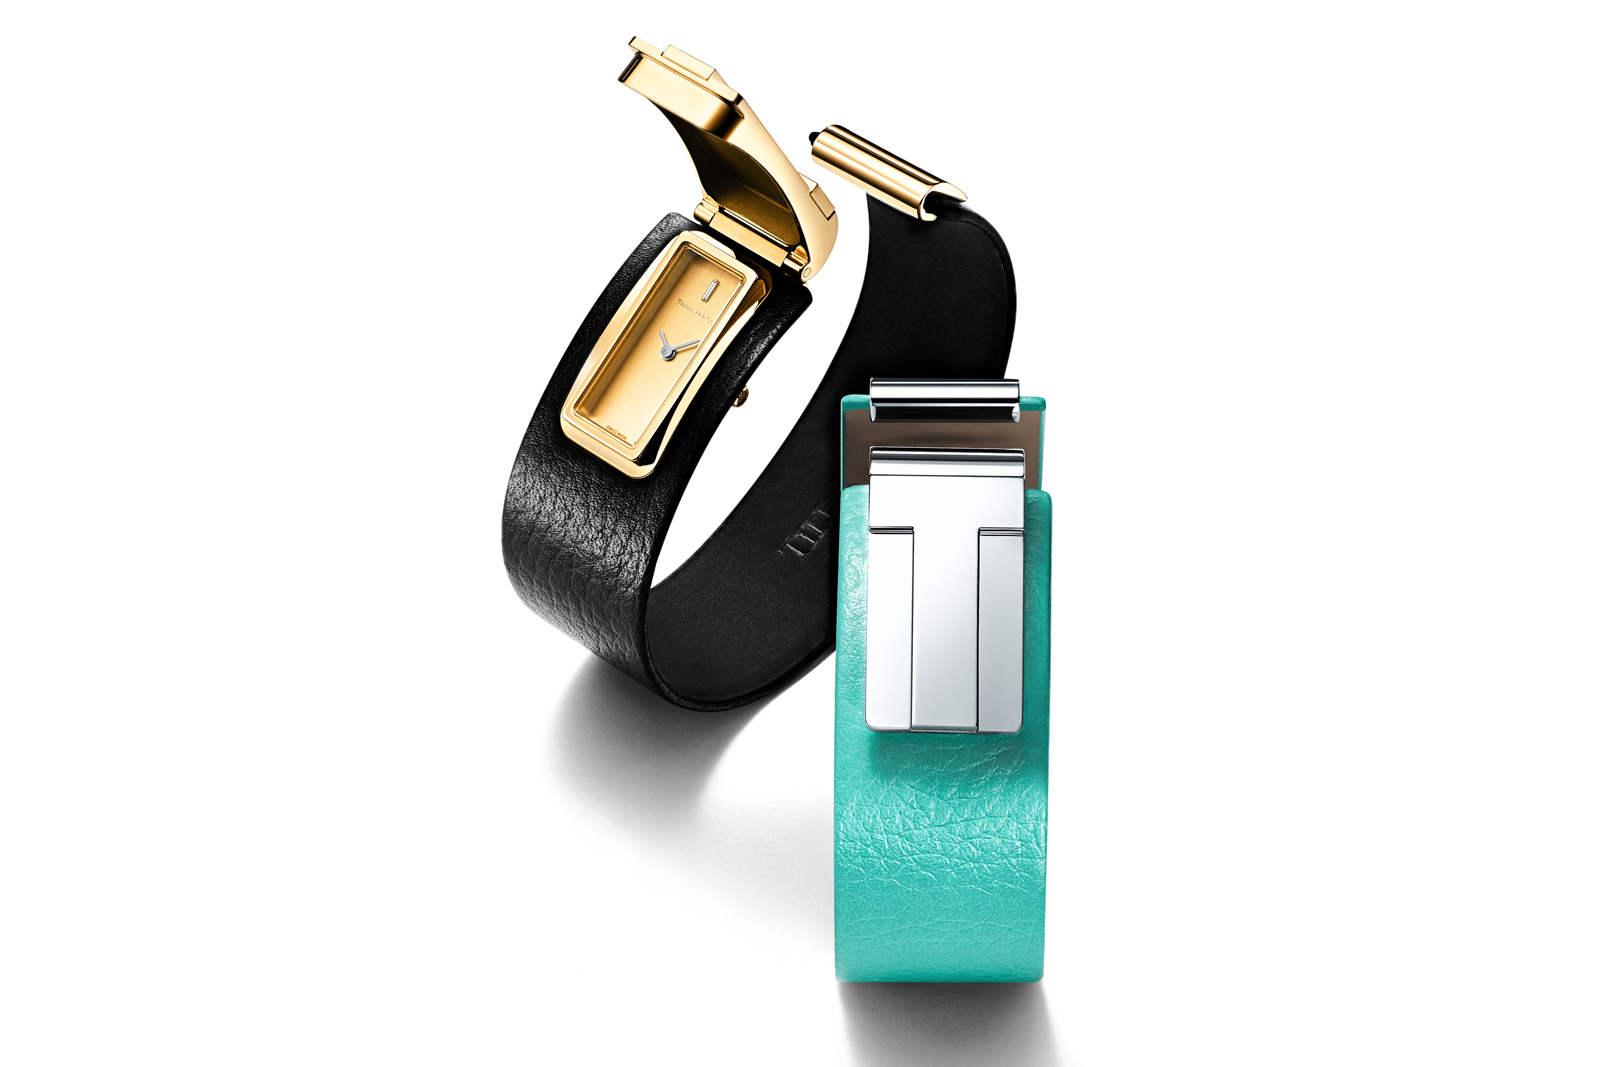 Tiffany & Co. 'Tiffany T' cuff watches in yellow gold and silver